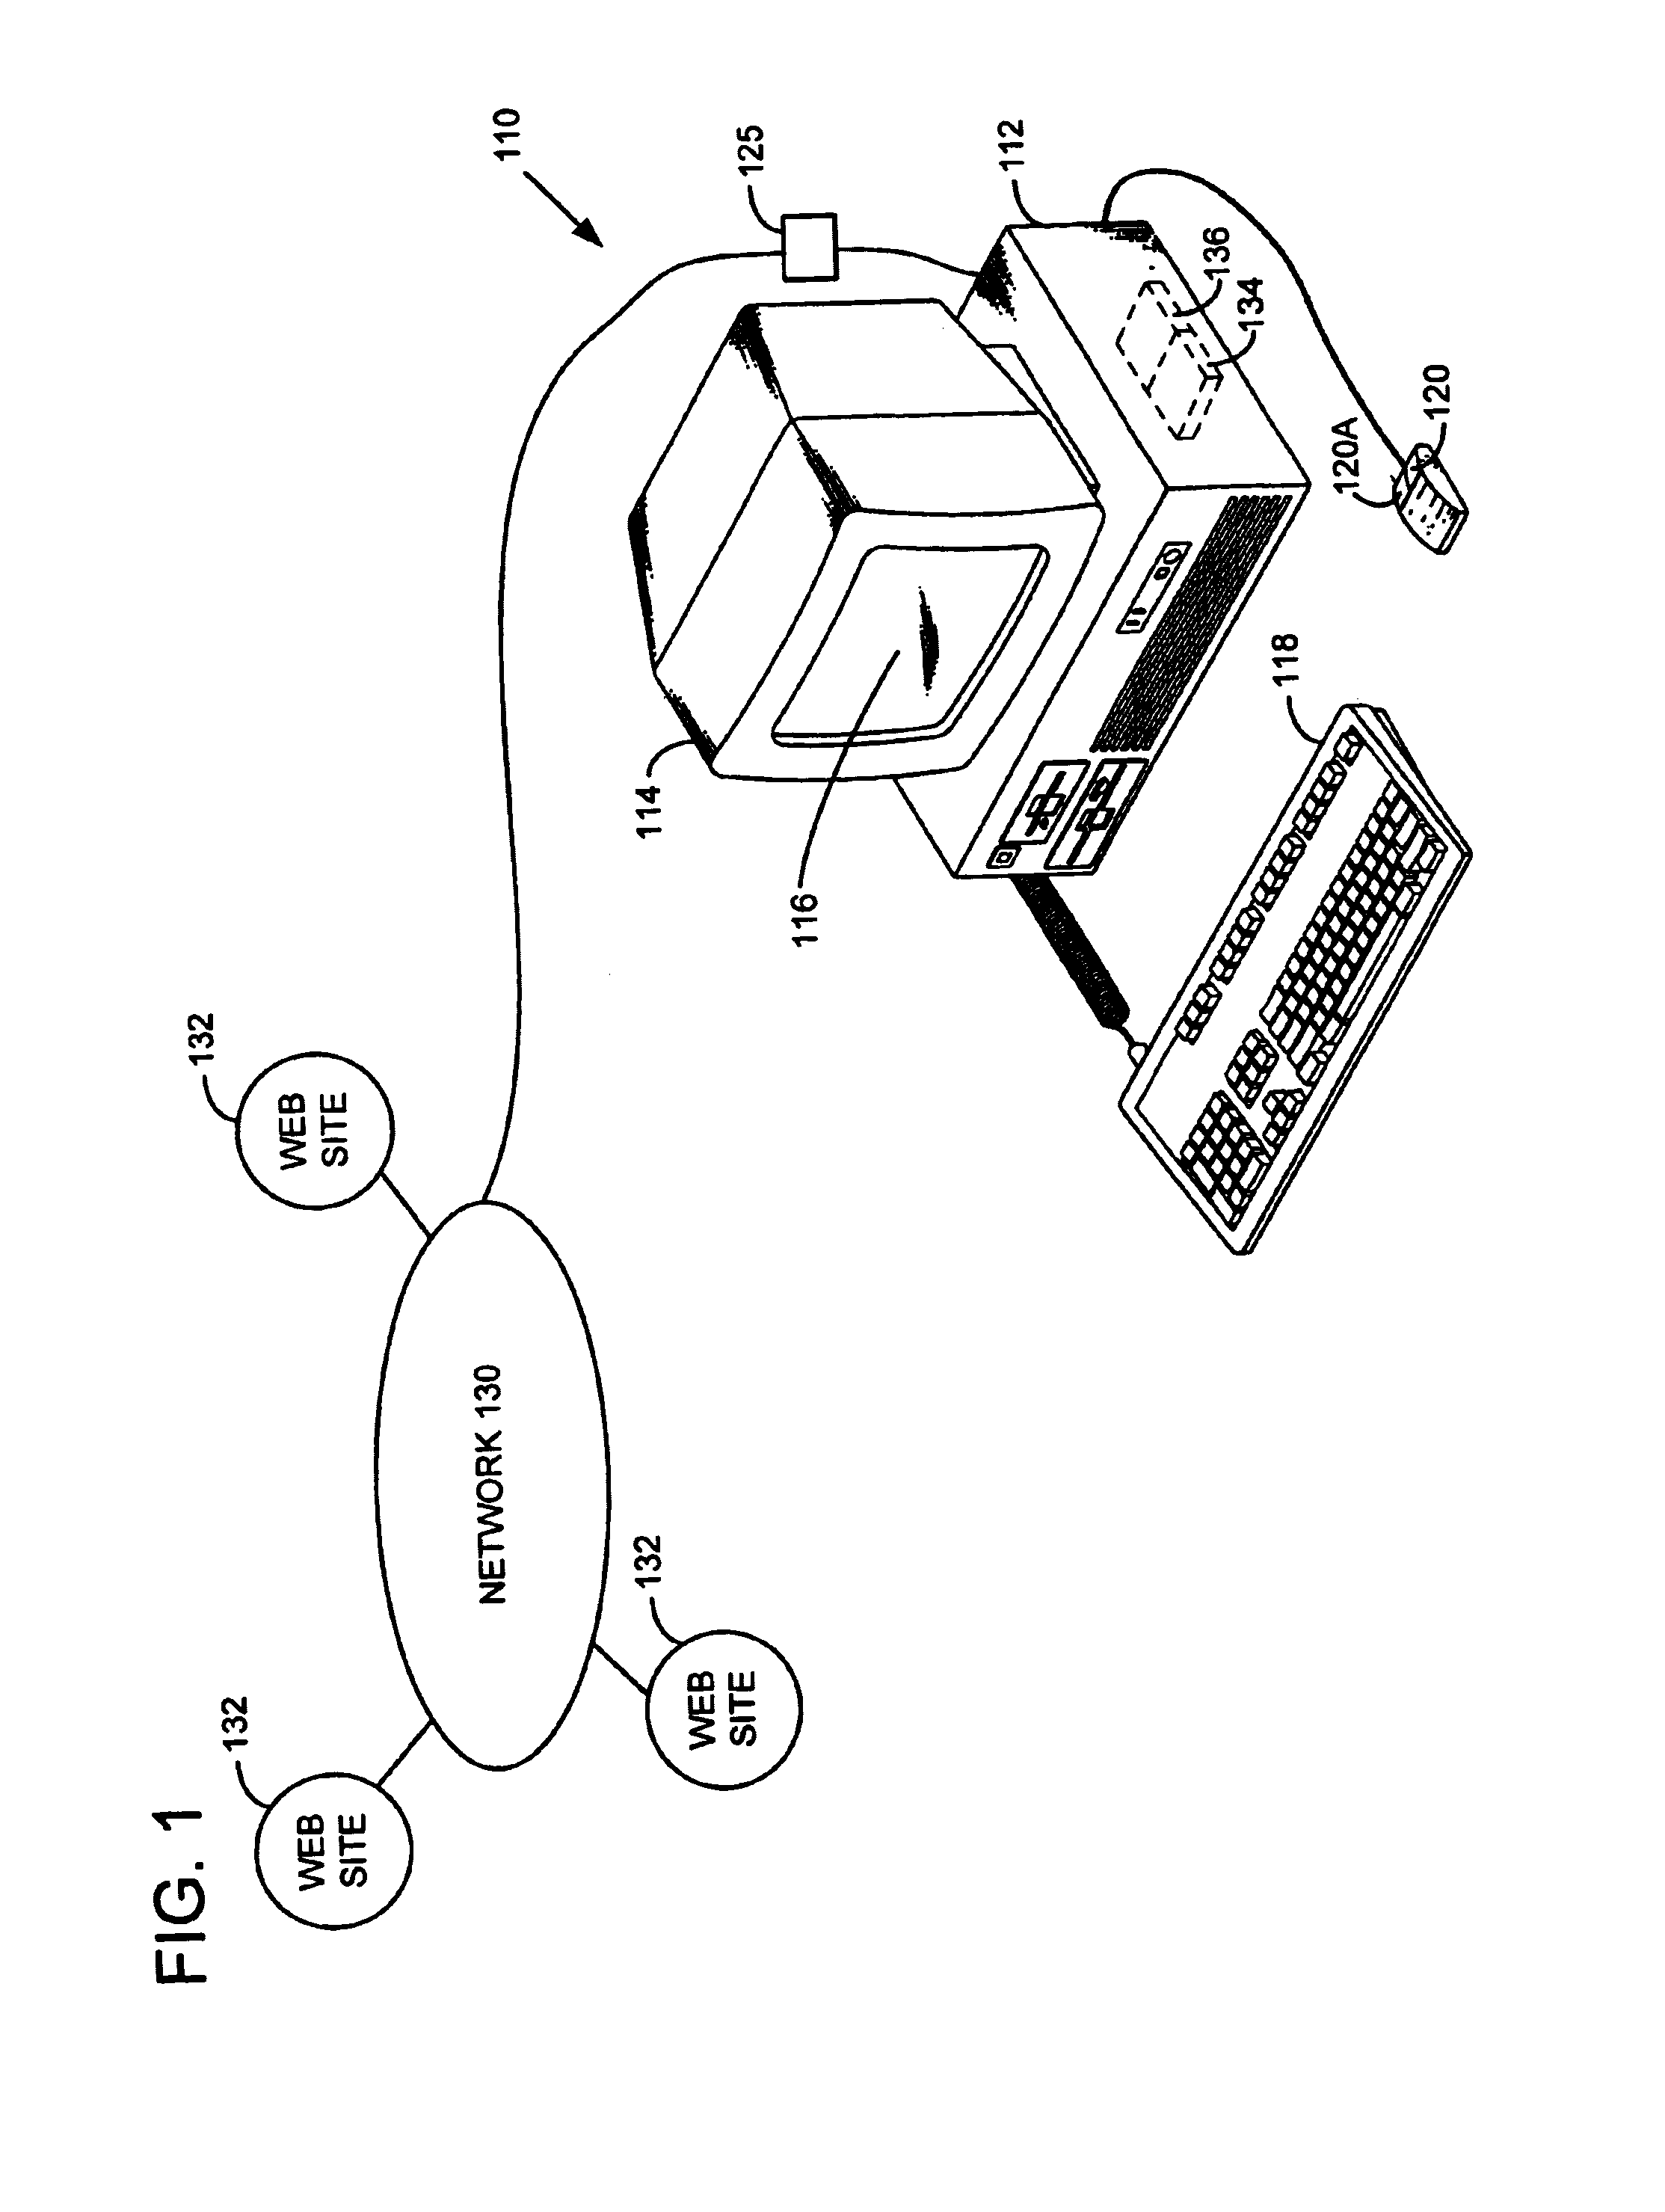 System and method for saving user-specified views of internet web page displays